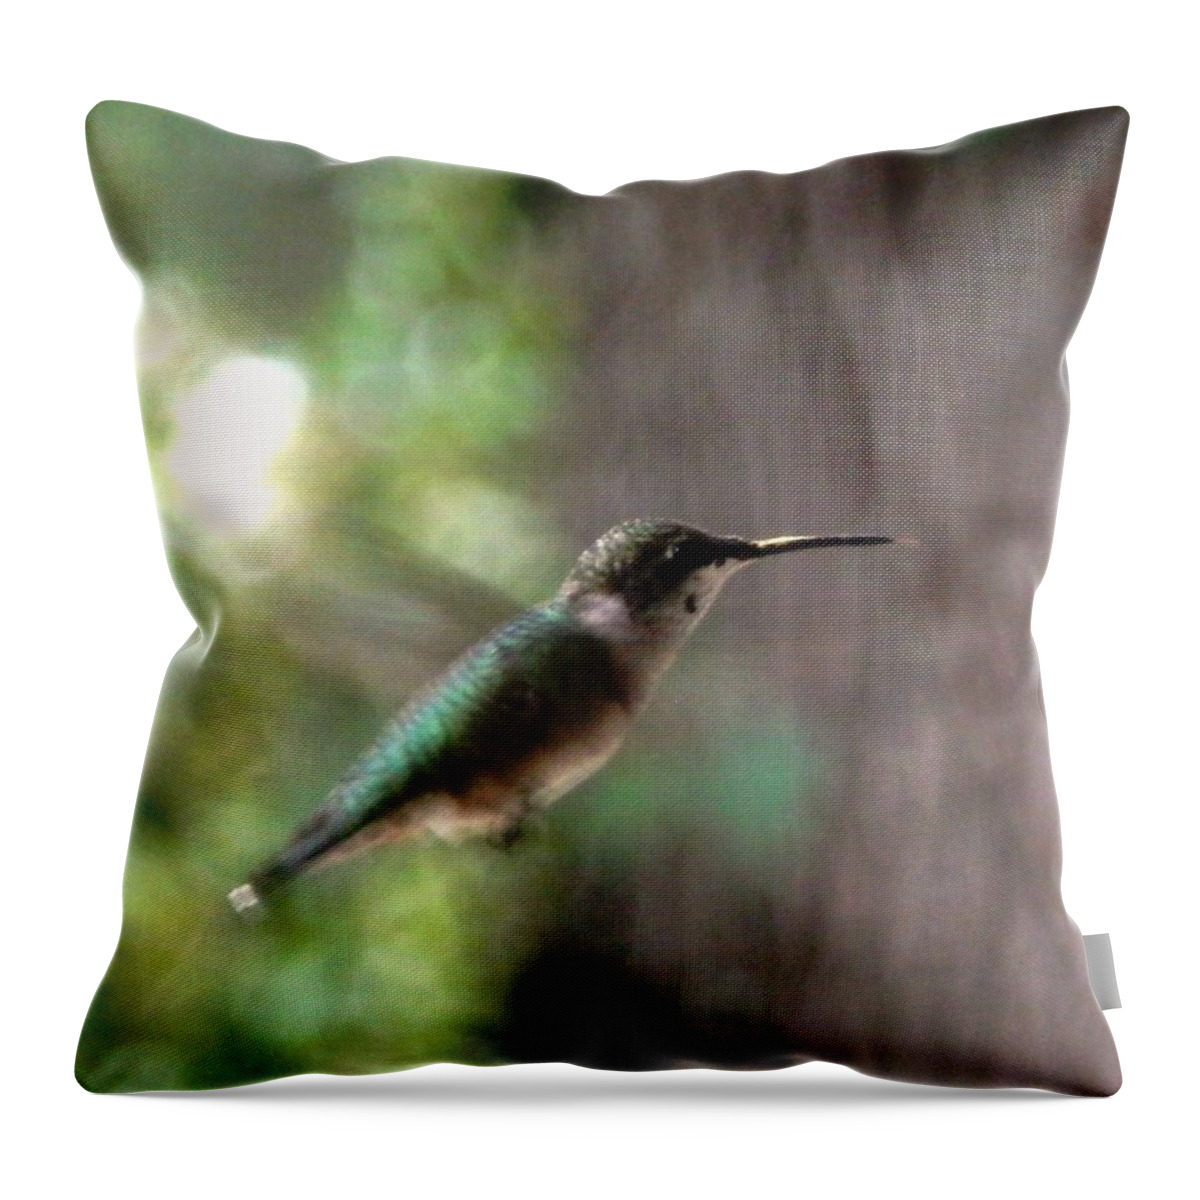 #hummingbird Throw Pillow featuring the photograph Hummingbird On A Mission by Belinda Lee